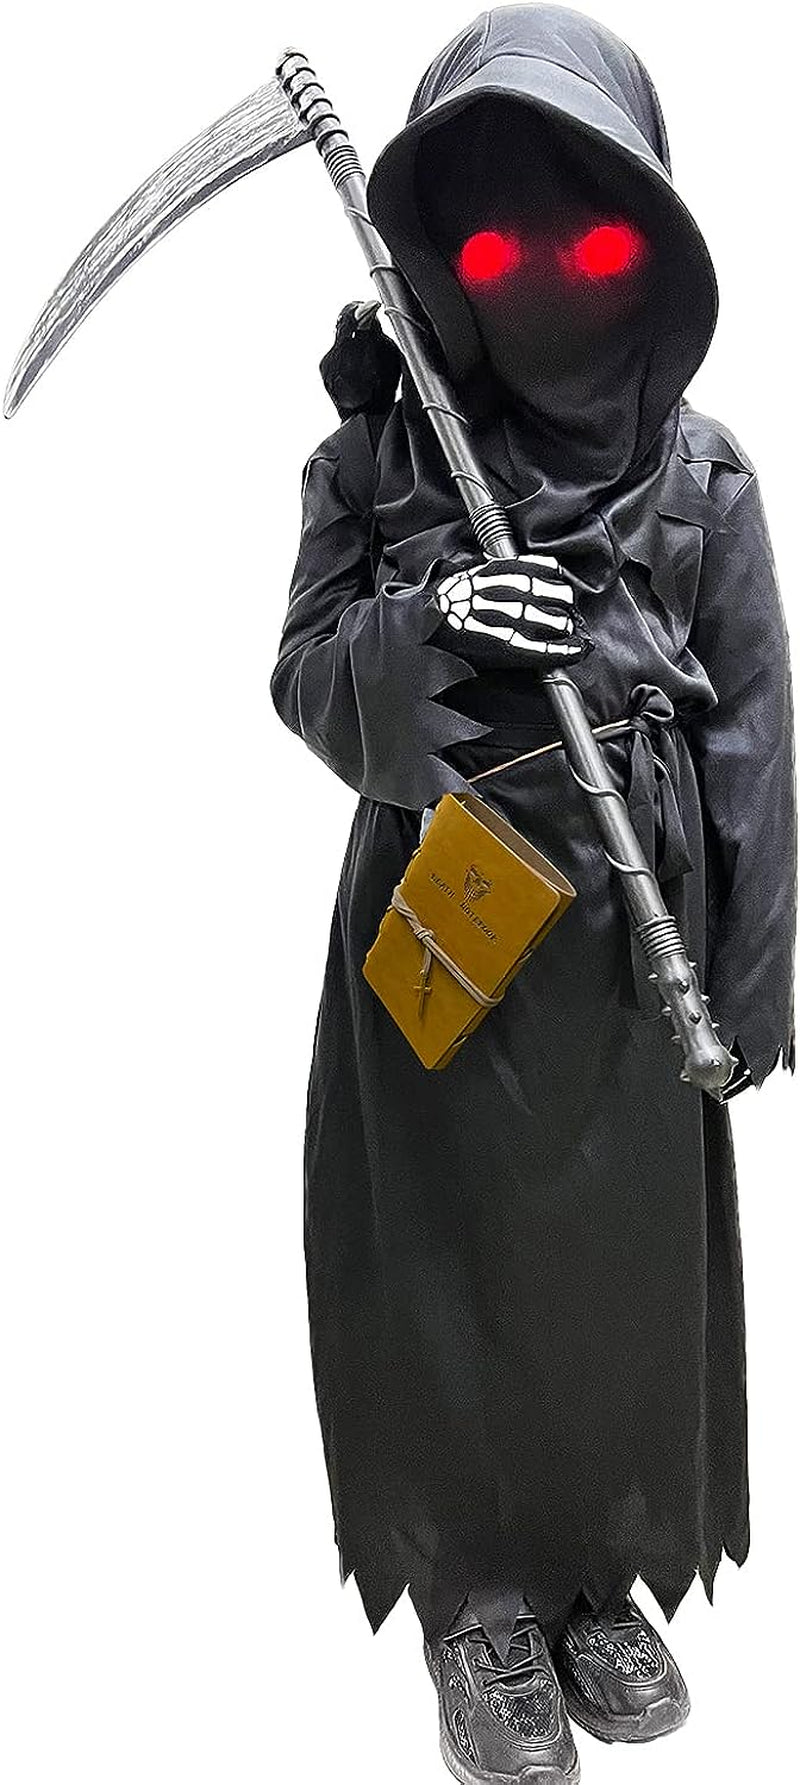 Longpo Halloween Costumes for Boys Grim Reaper Costume Kids Set Scary Ghost Cosplay Outfit Halloween Party Favors Gifts